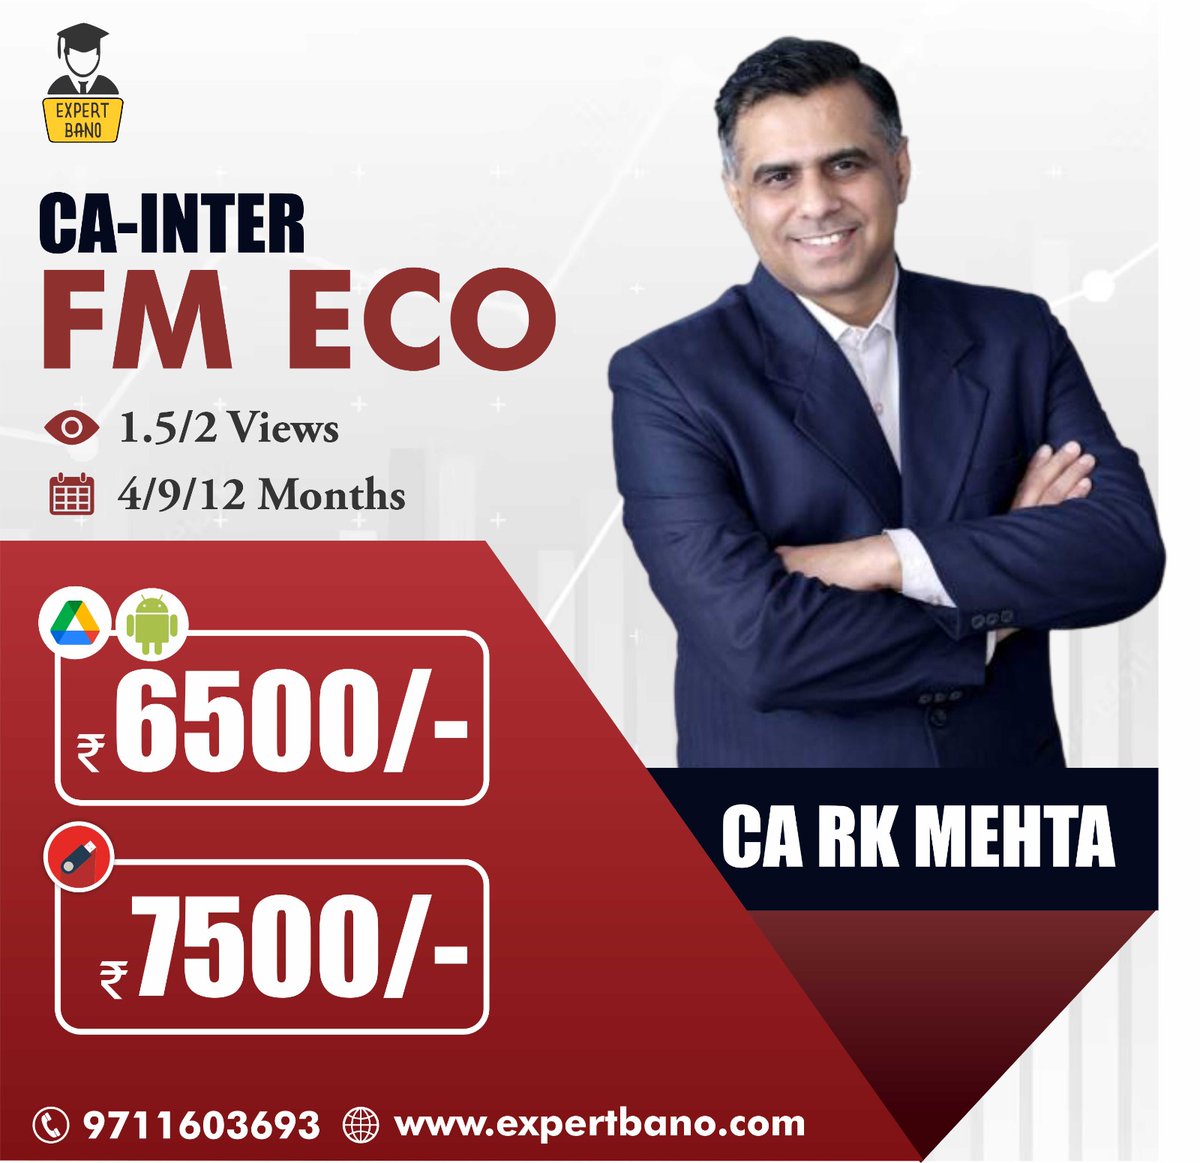 CA Inter FM ECO by CA RK Mehta.
To buy, pls visit: bit.ly/3He0vj9
Call at 9711603693 for inquiries.
#expertbano #cainterfmeco #carkmehta #icai #caexams #caonlineclasses #caintergroup2